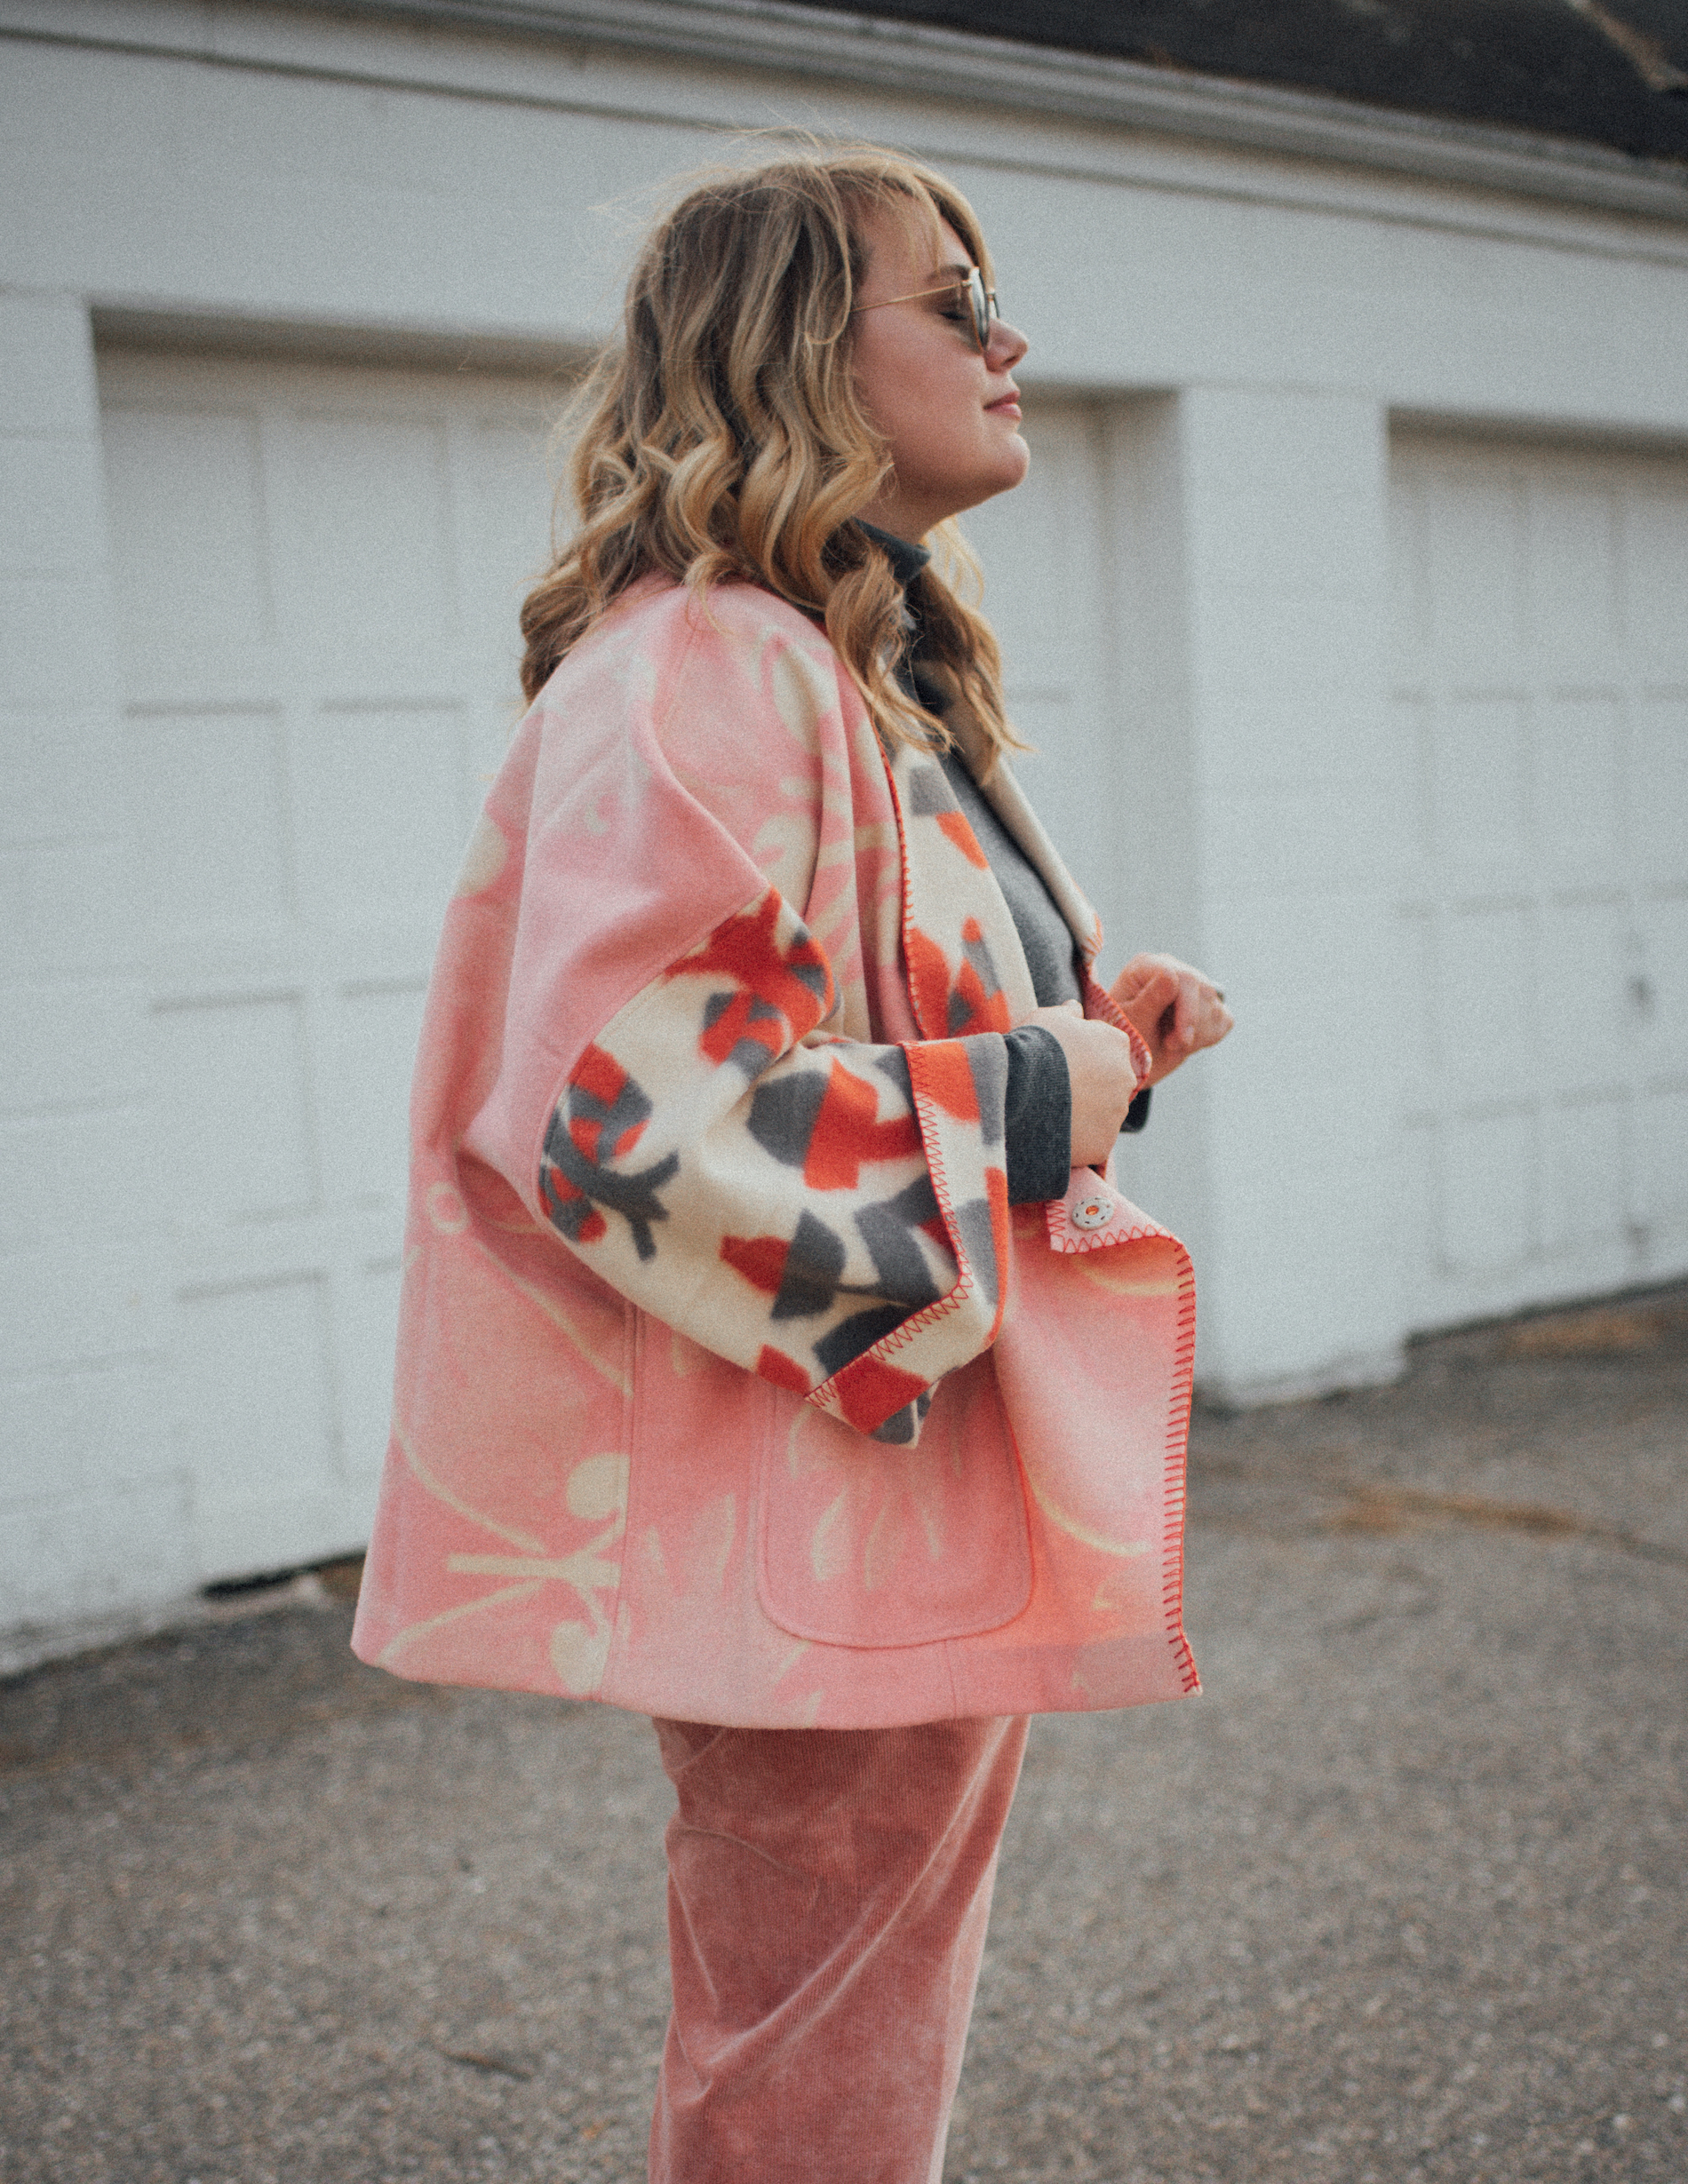 Winter Outfits But Make It Pink. Sharing a pink look from Anthropologie Plus, this winter outfit makes a statement! 